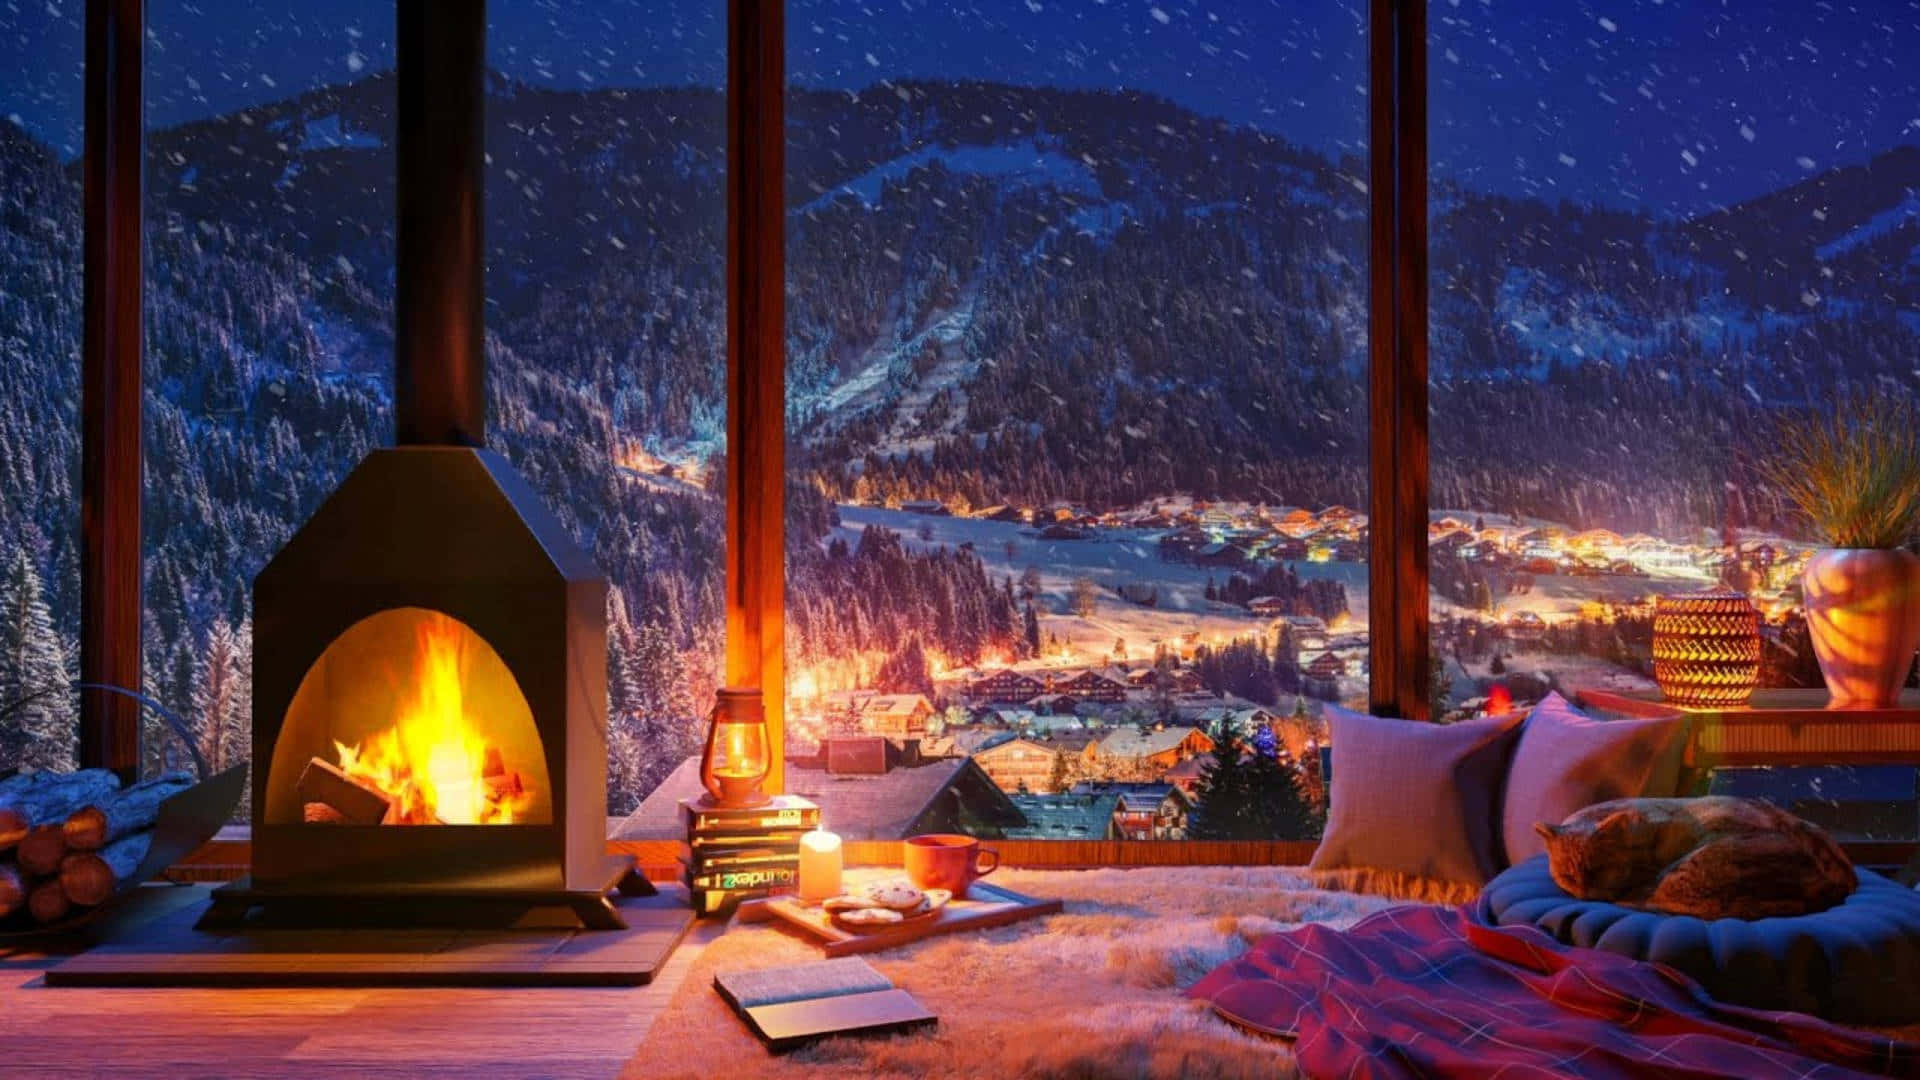 A Fireplace In A Room With A View Of The Mountains